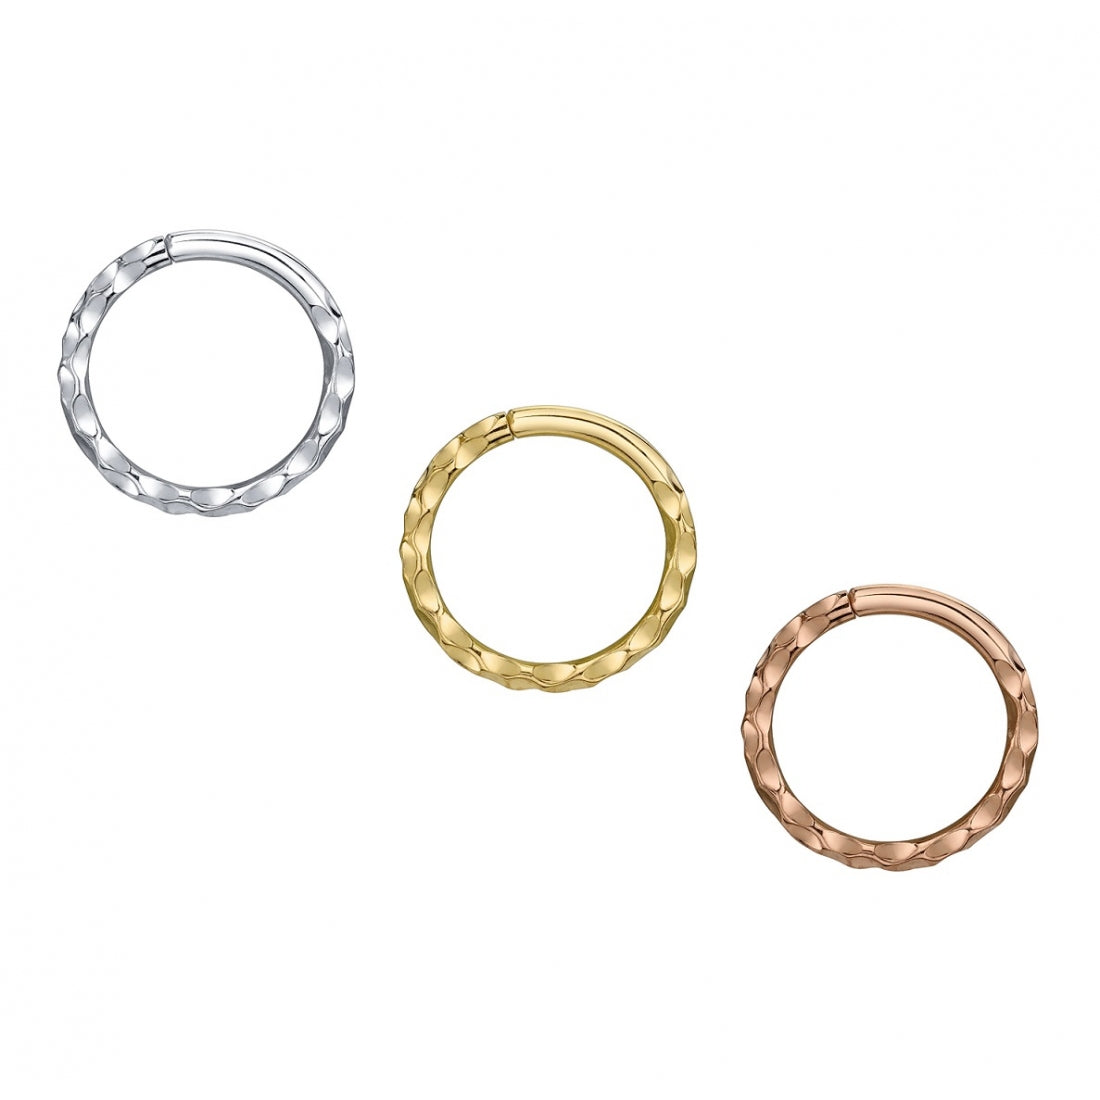 BVLA's "Hammered Seam Ring" shown from left to right in 14k White gold, 14k Yellow gold and 14k Rose gold